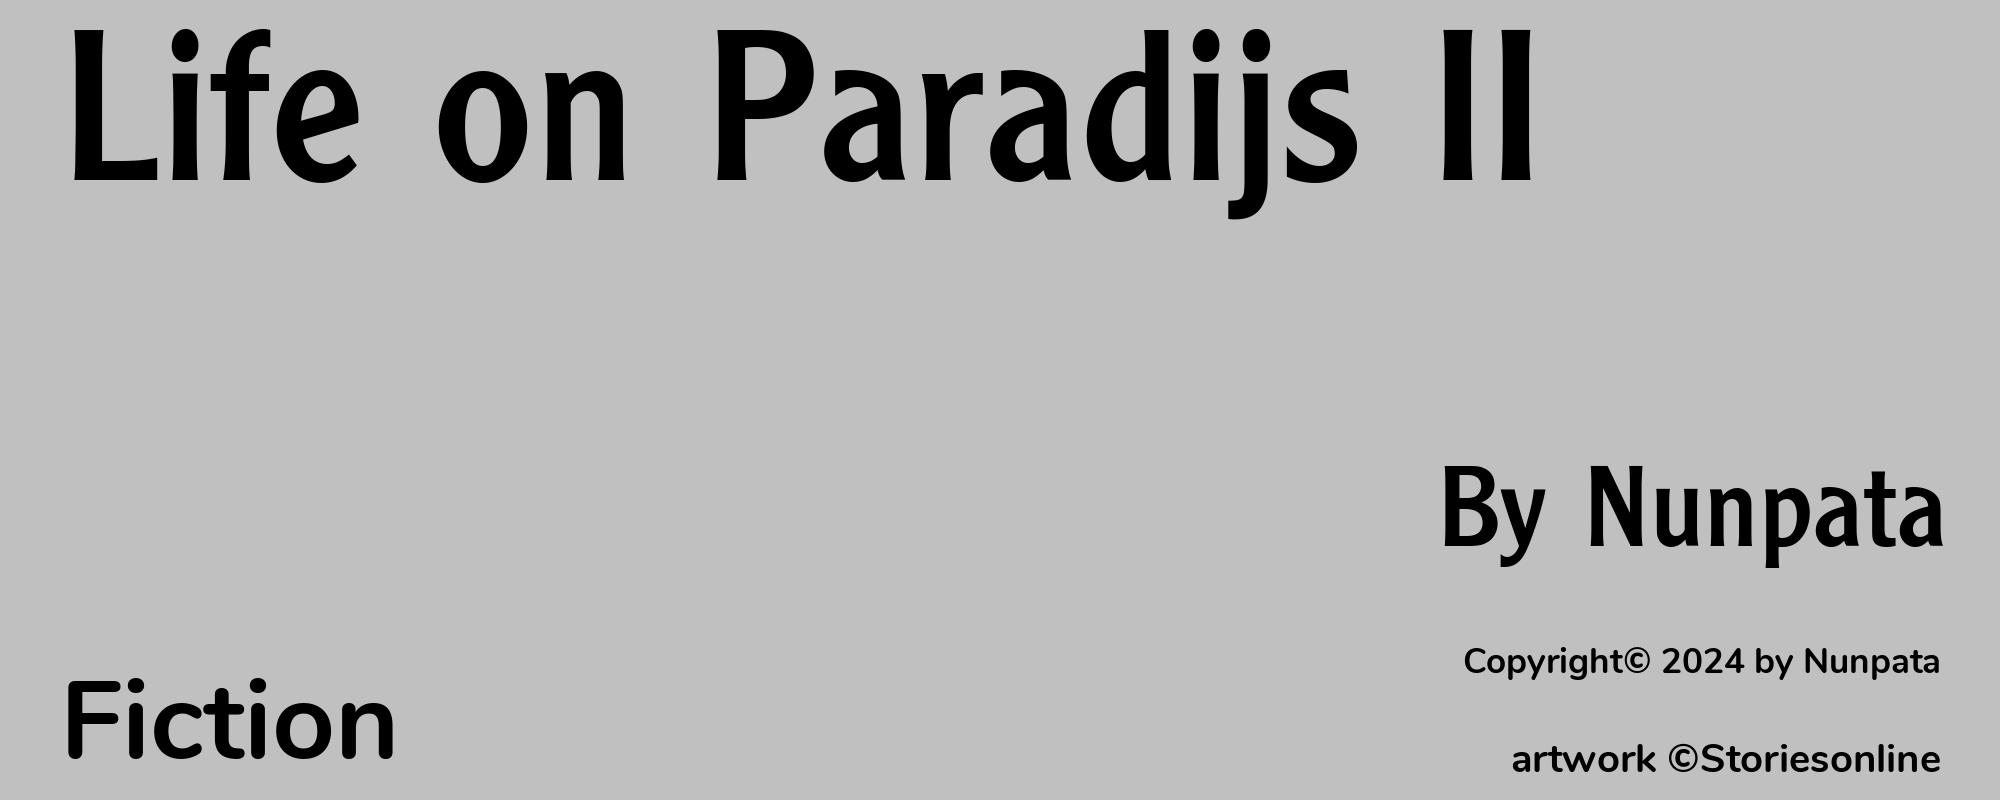 Life on Paradijs II - Cover